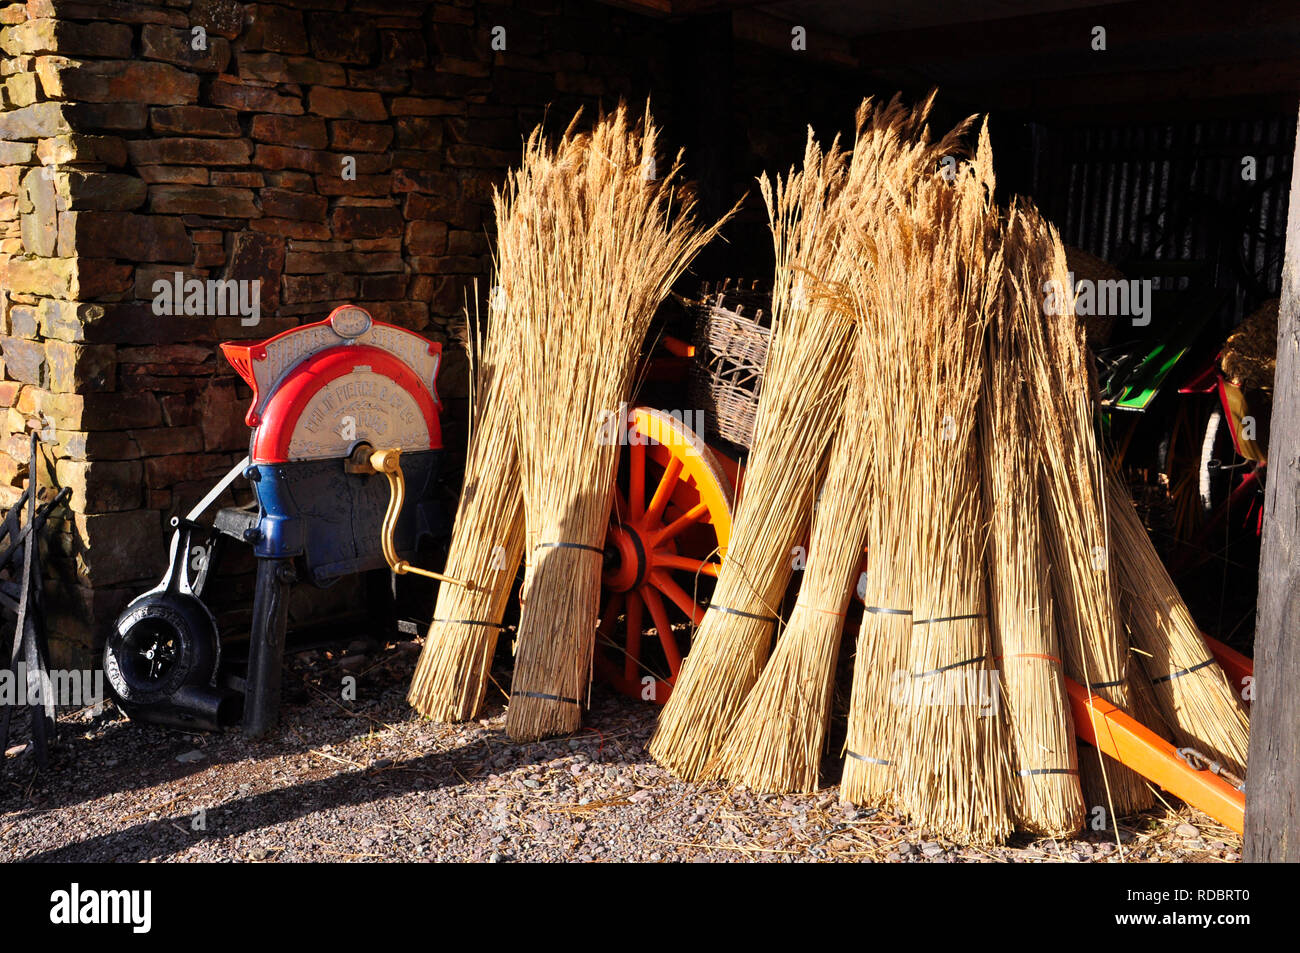 Thatching reeds dried and ready for use on the roofs of the cottages in the Kerry Bog Village, County Kerry,Ireland. Stock Photo